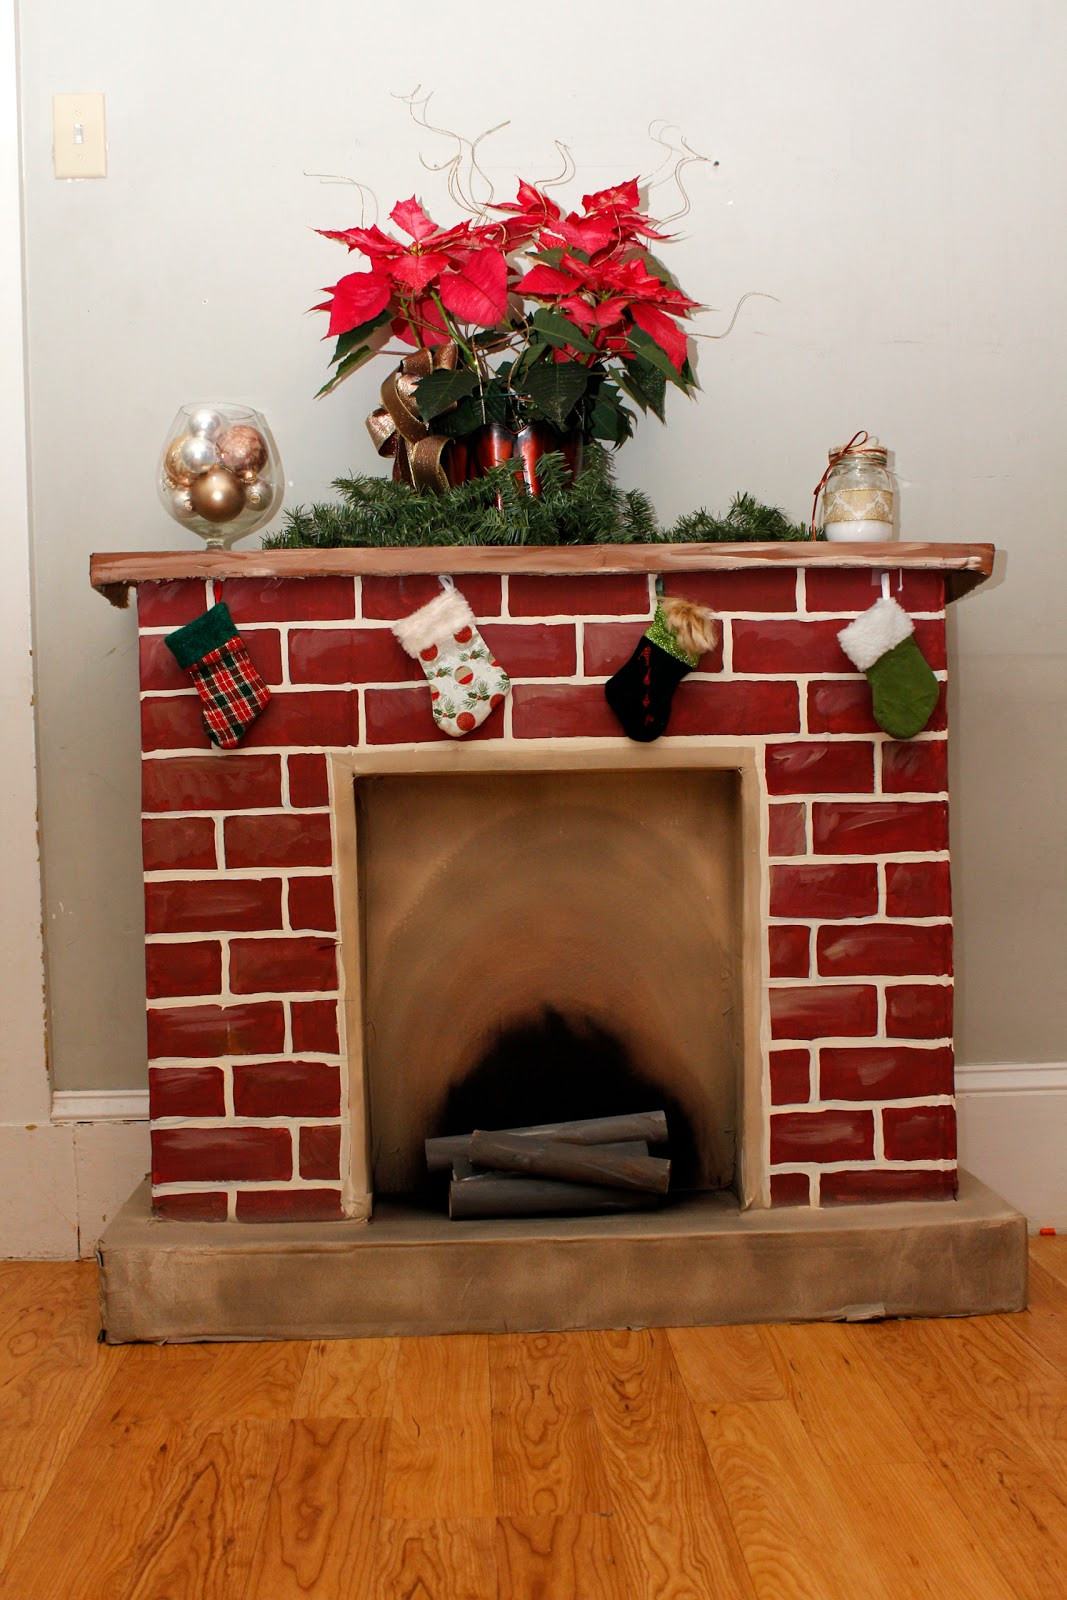 Fake Fireplace For Christmas
 365 Days to Simplicity Chestnuts roasting on an cardboard